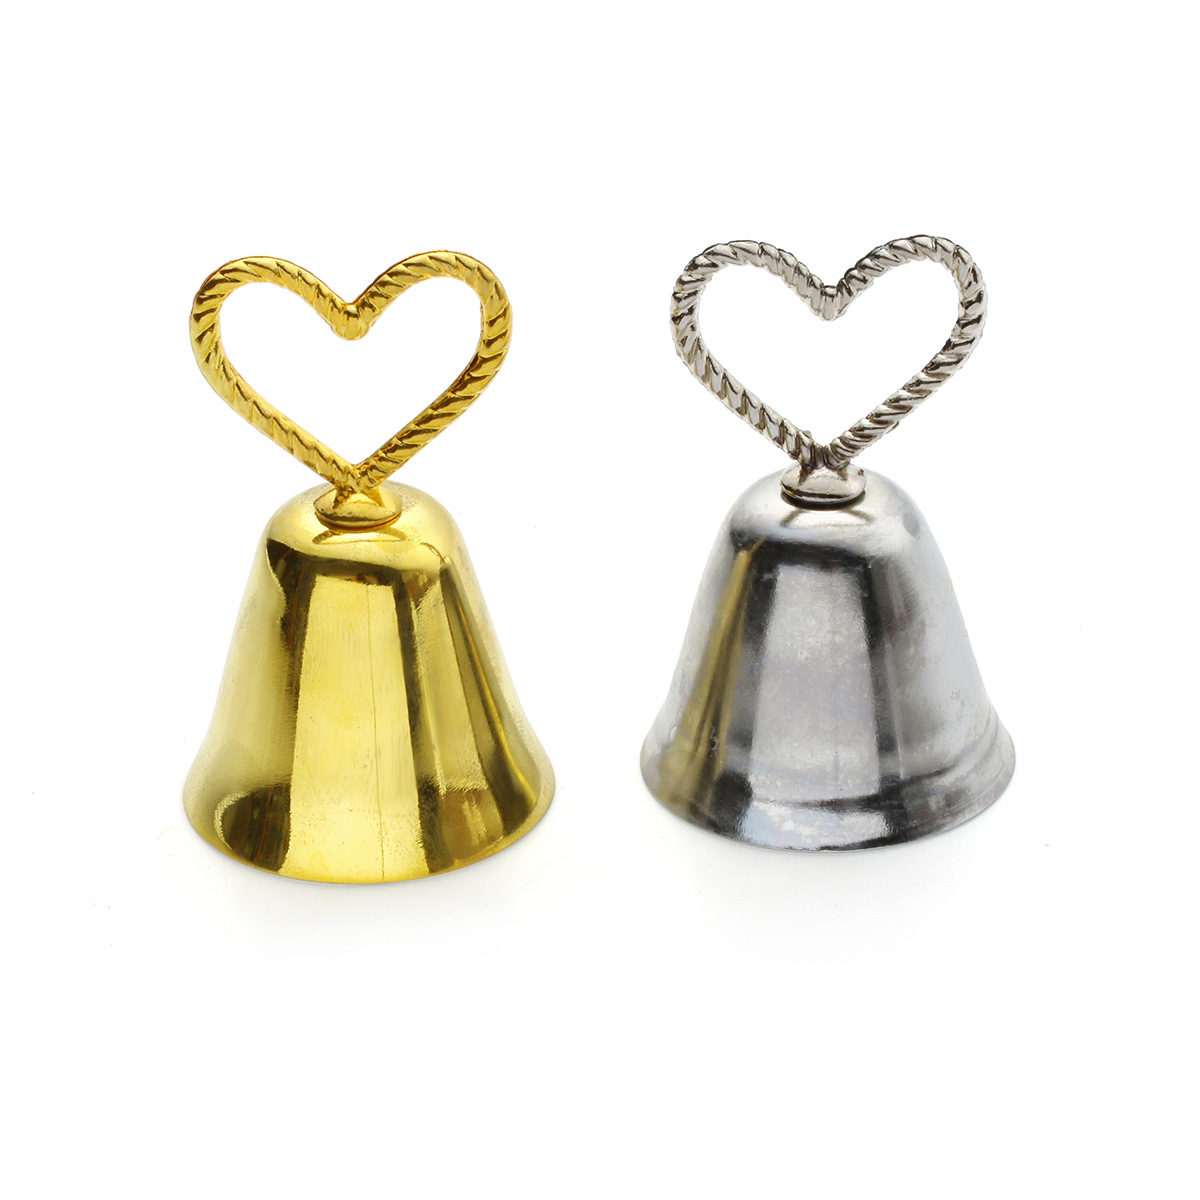 Other Wedding Favors size 6X34cm beautiful gold silver kissing bell place card holder po holder table decoration party9844963